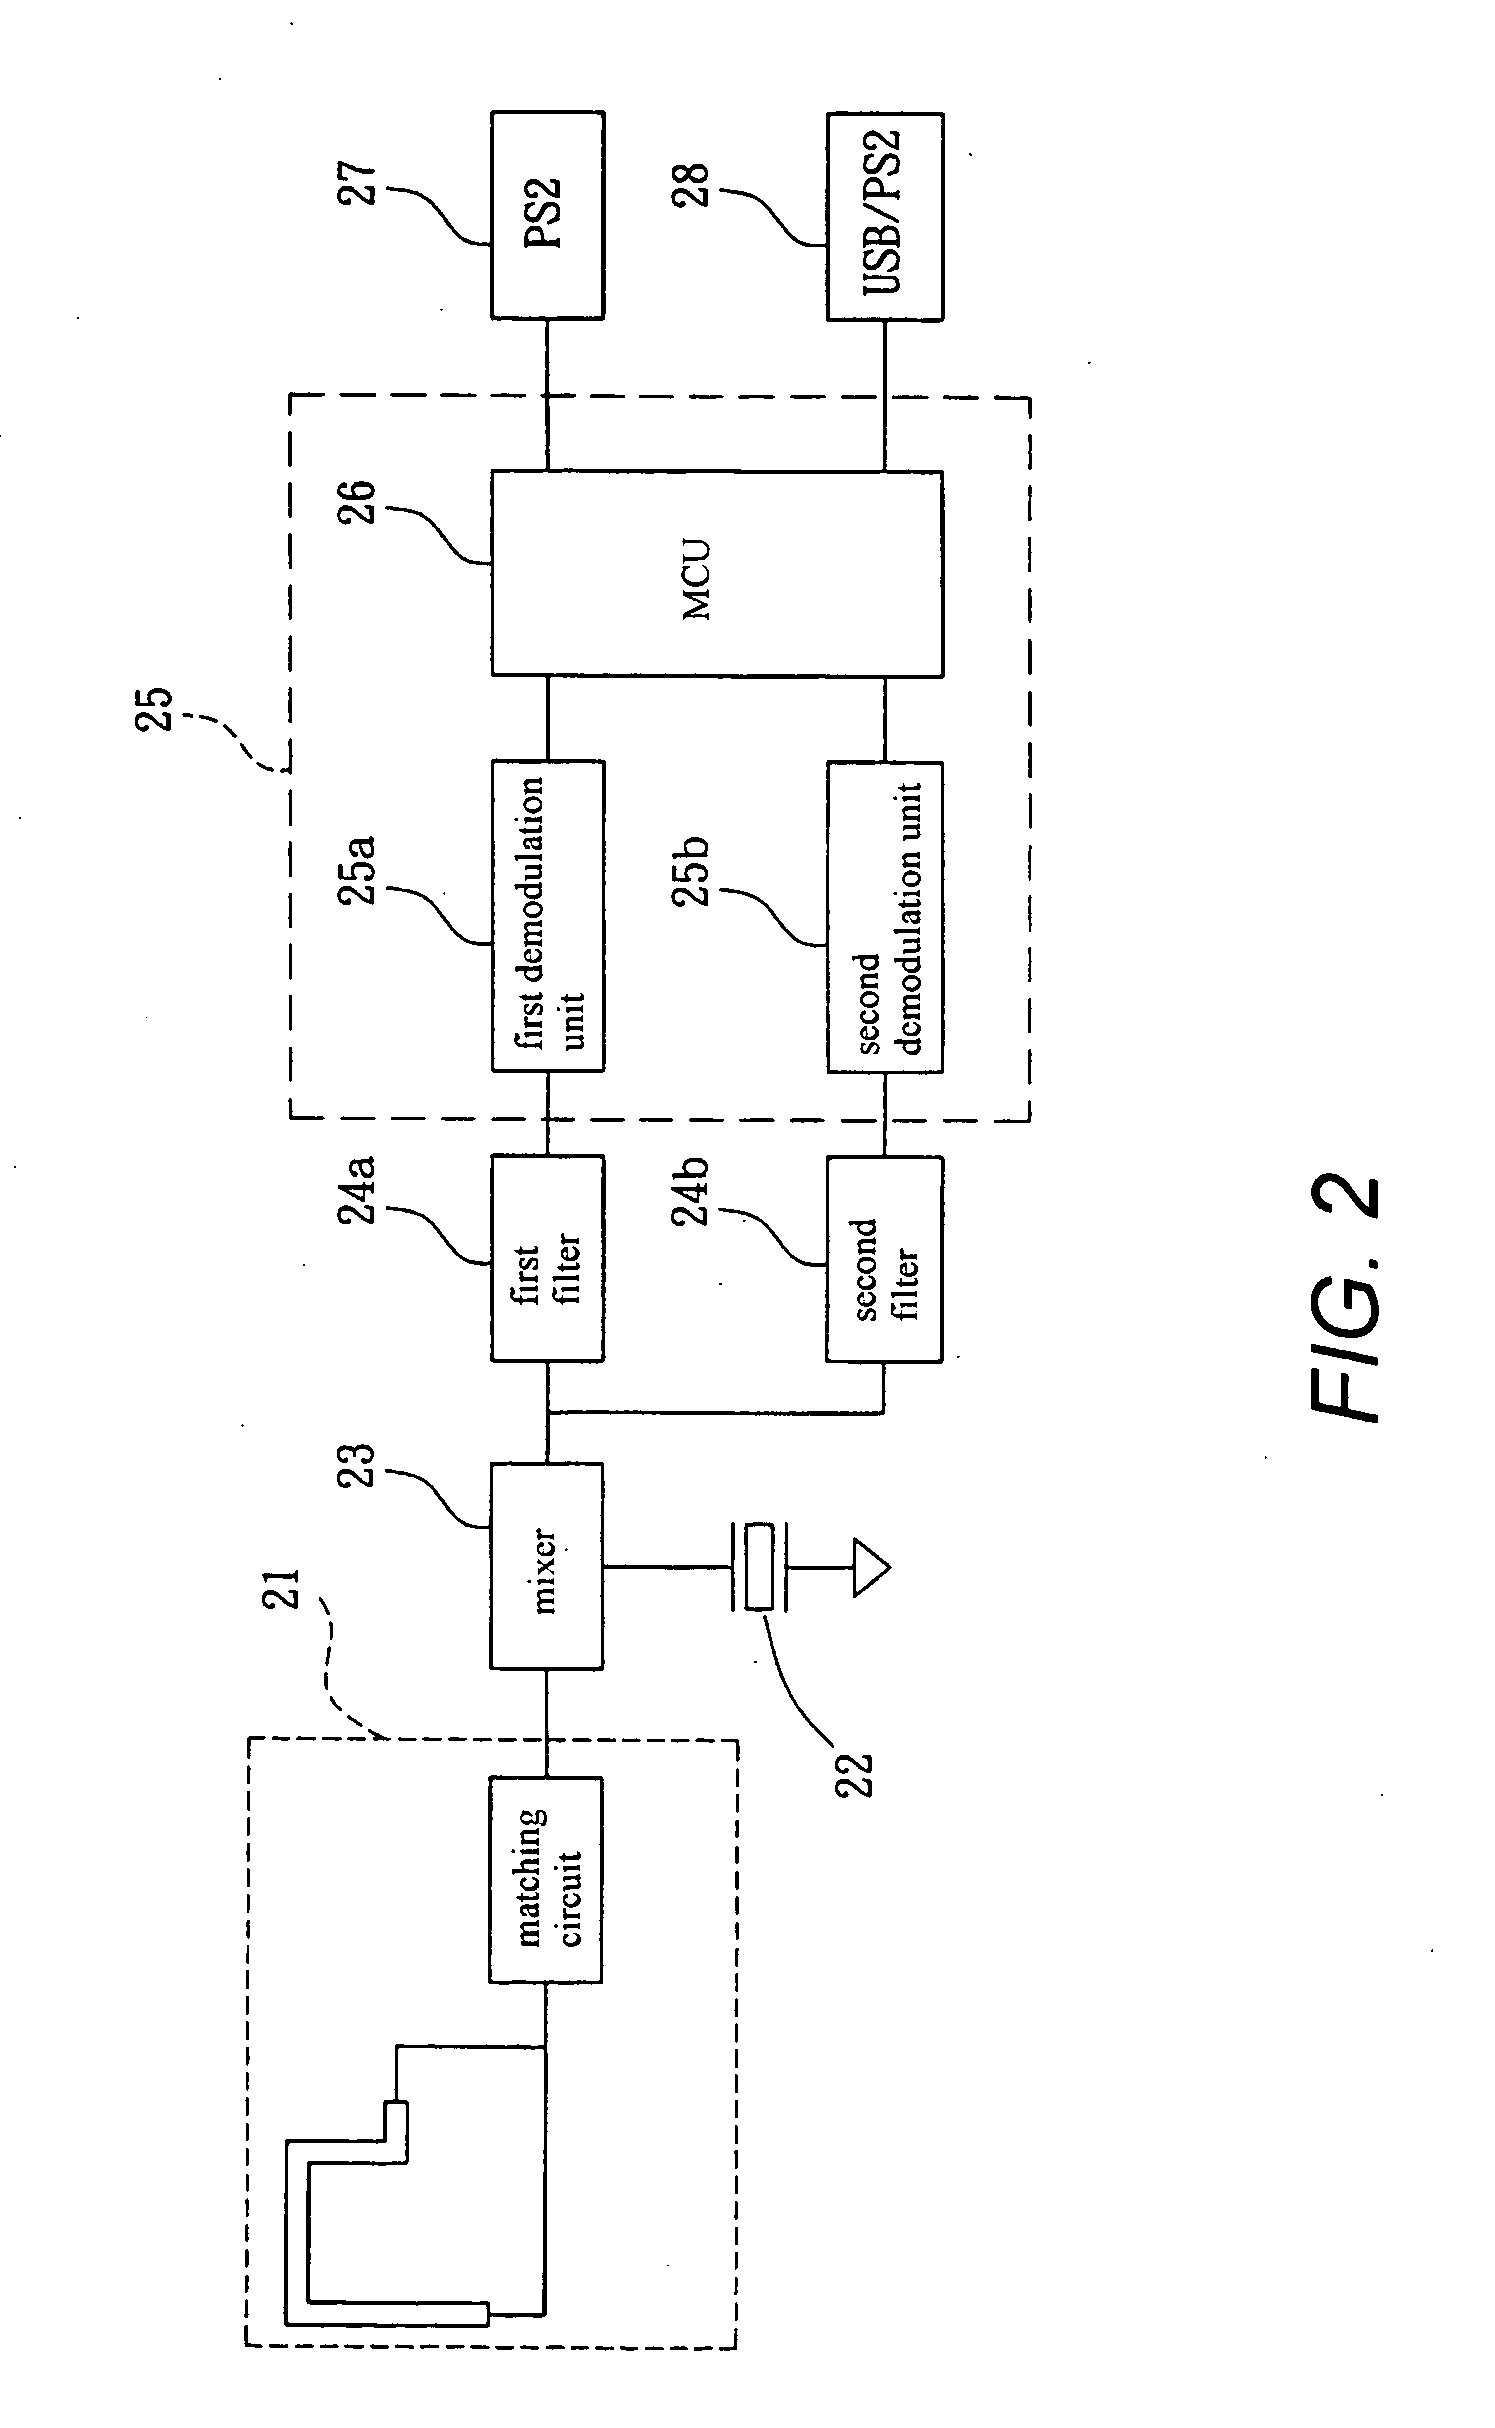 Multi-frequency wireless receiver for computer peripheral device